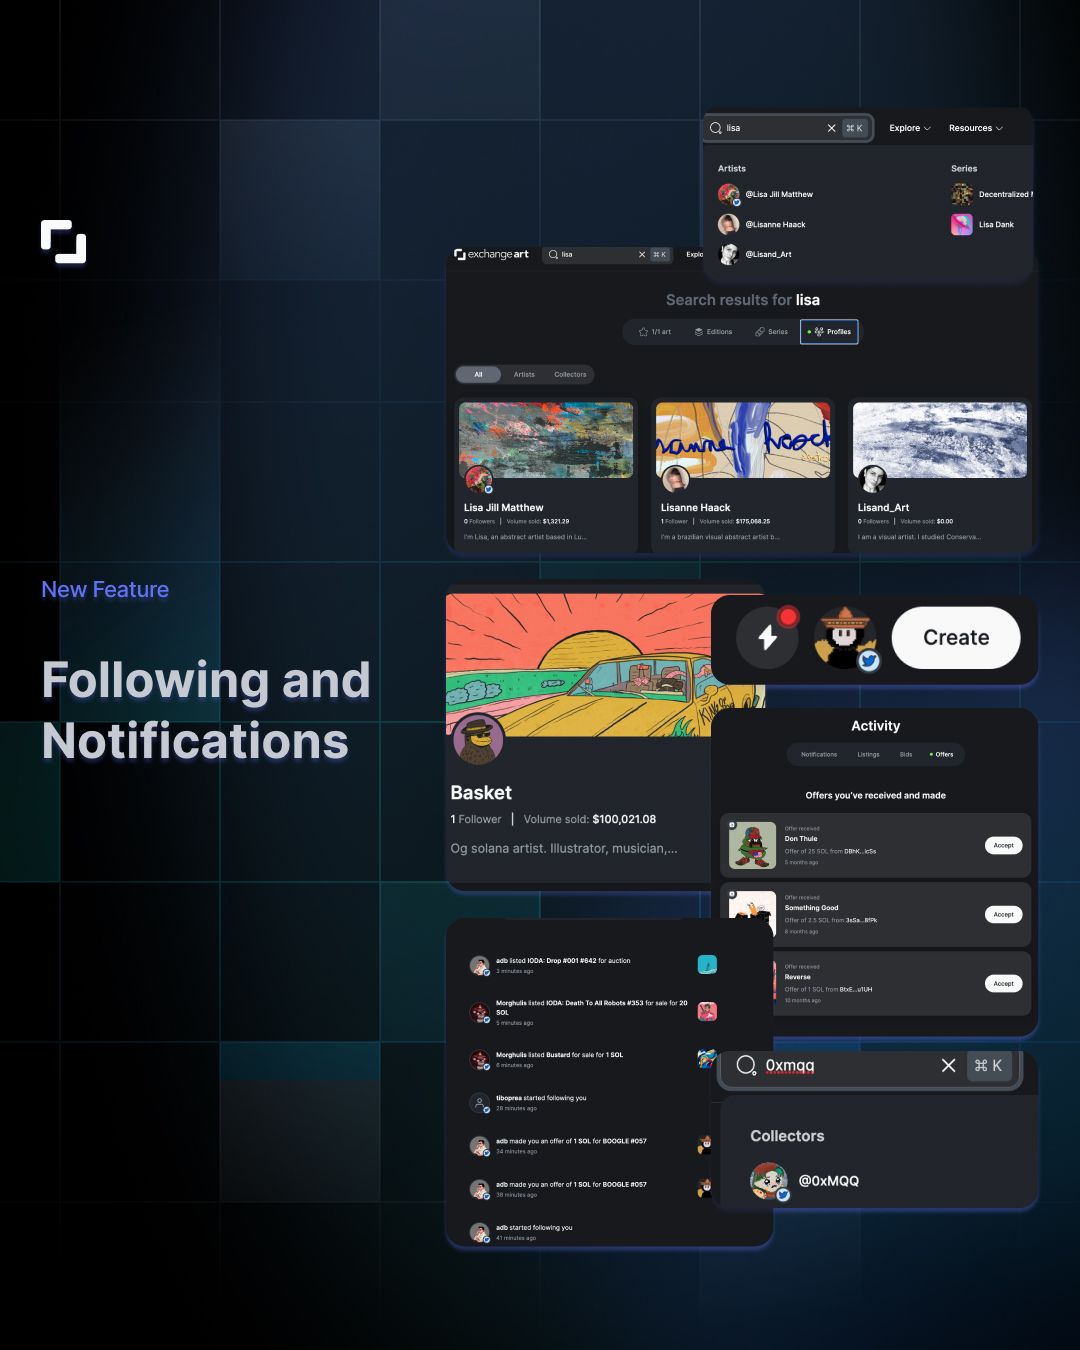 Introducing "Following and Notifications"